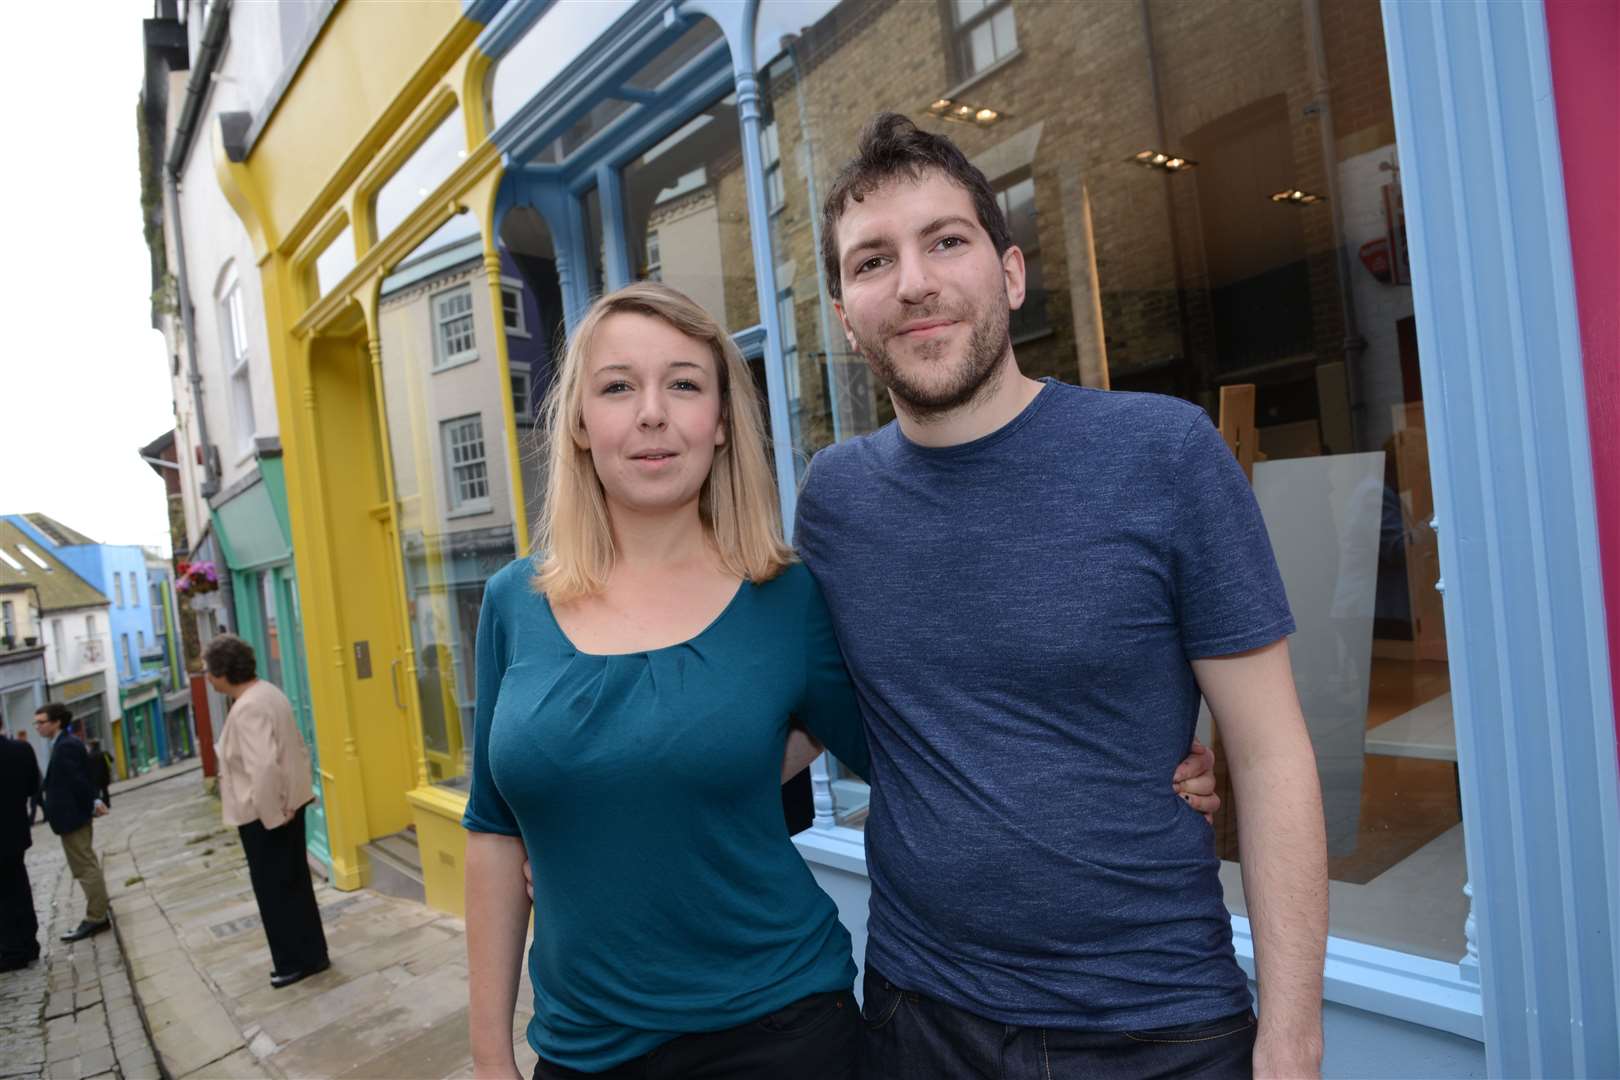 Stephen Brothwell and Alice Larkin opened Steep Street Coffee House along the Old High Street in Folkestone. Picture: Gary Browne